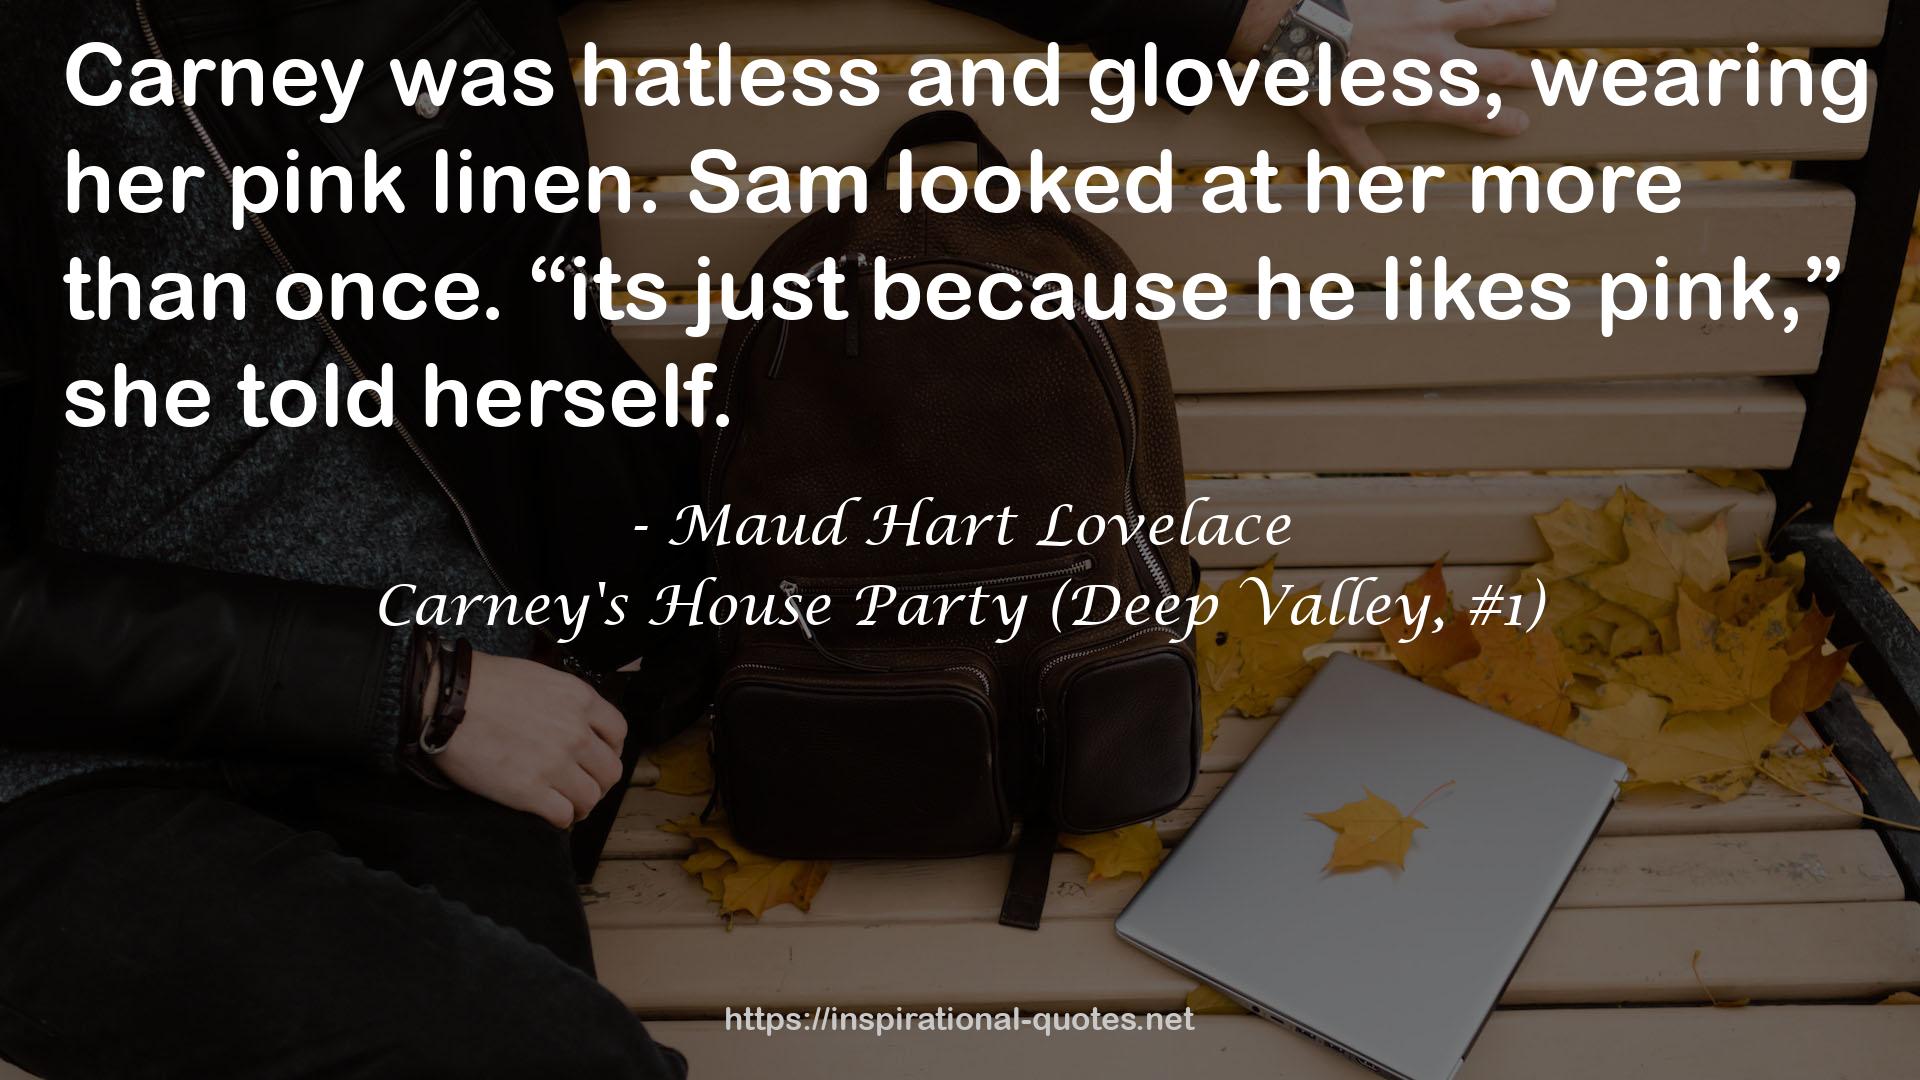 Carney's House Party (Deep Valley, #1) QUOTES